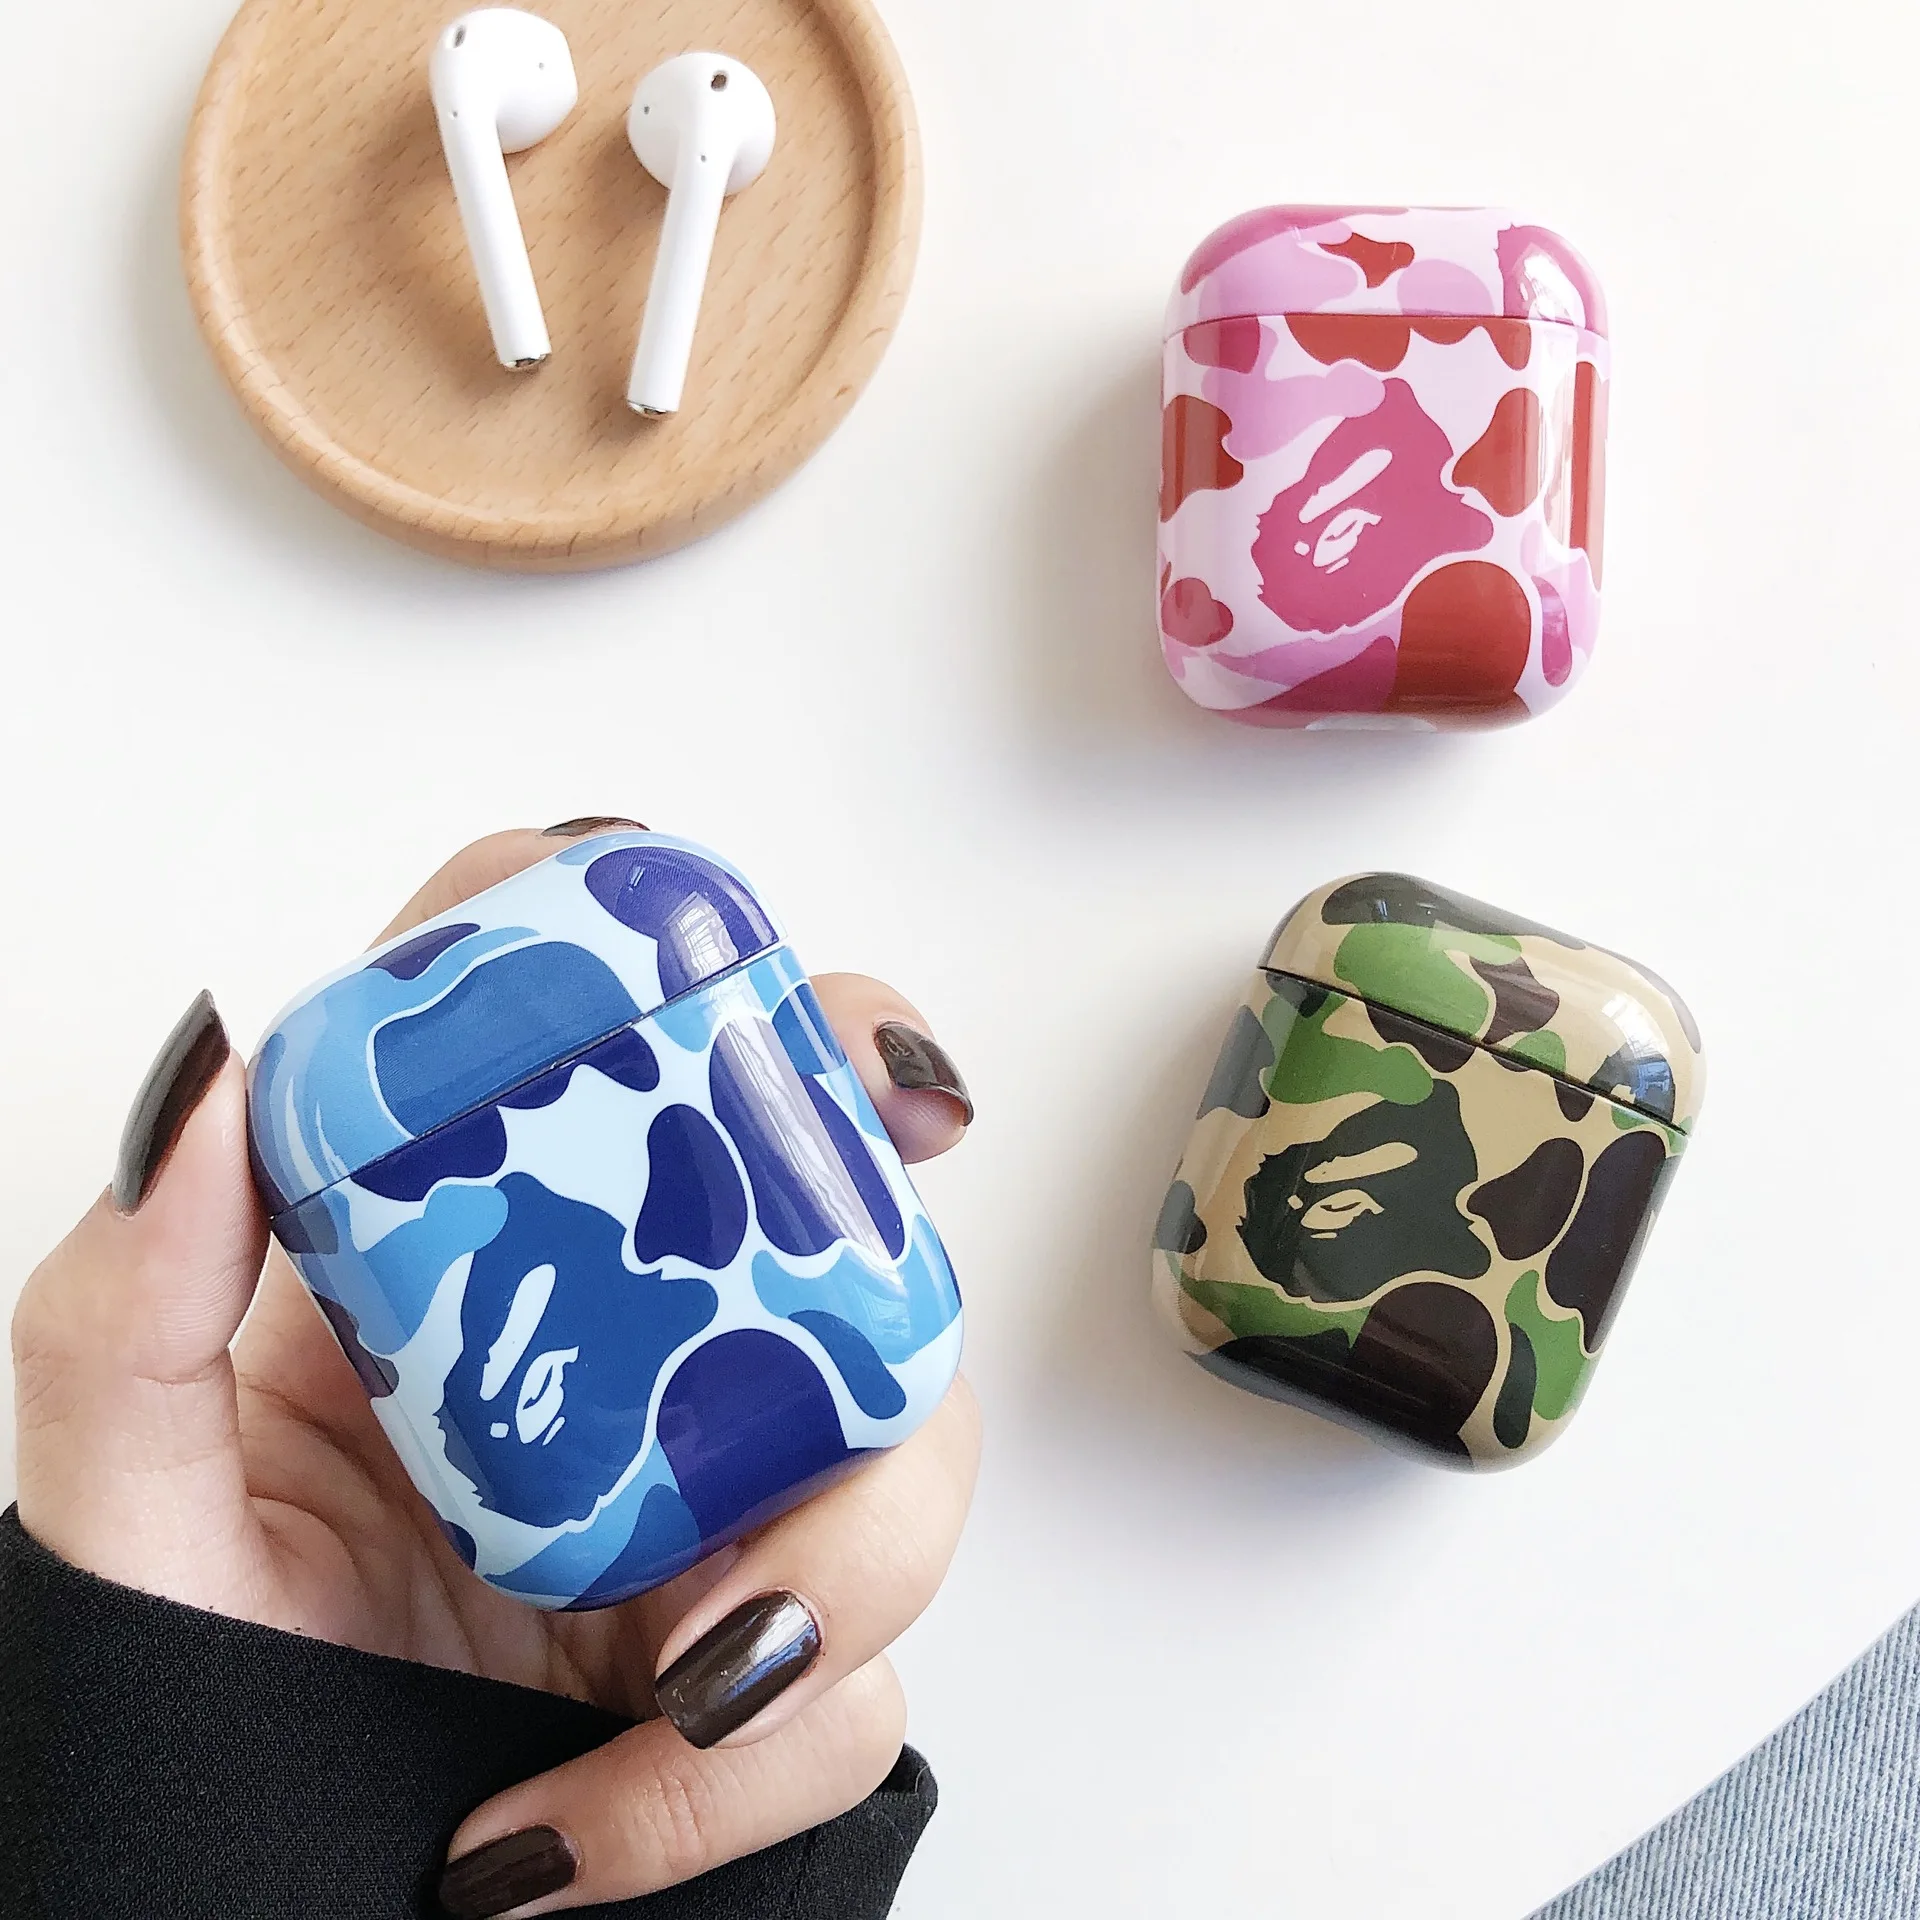 

Camouflage PC Earphone Case for AirPods 1 2 Cool Camo Ape Aape Fashion Bape Free Shipping, Green